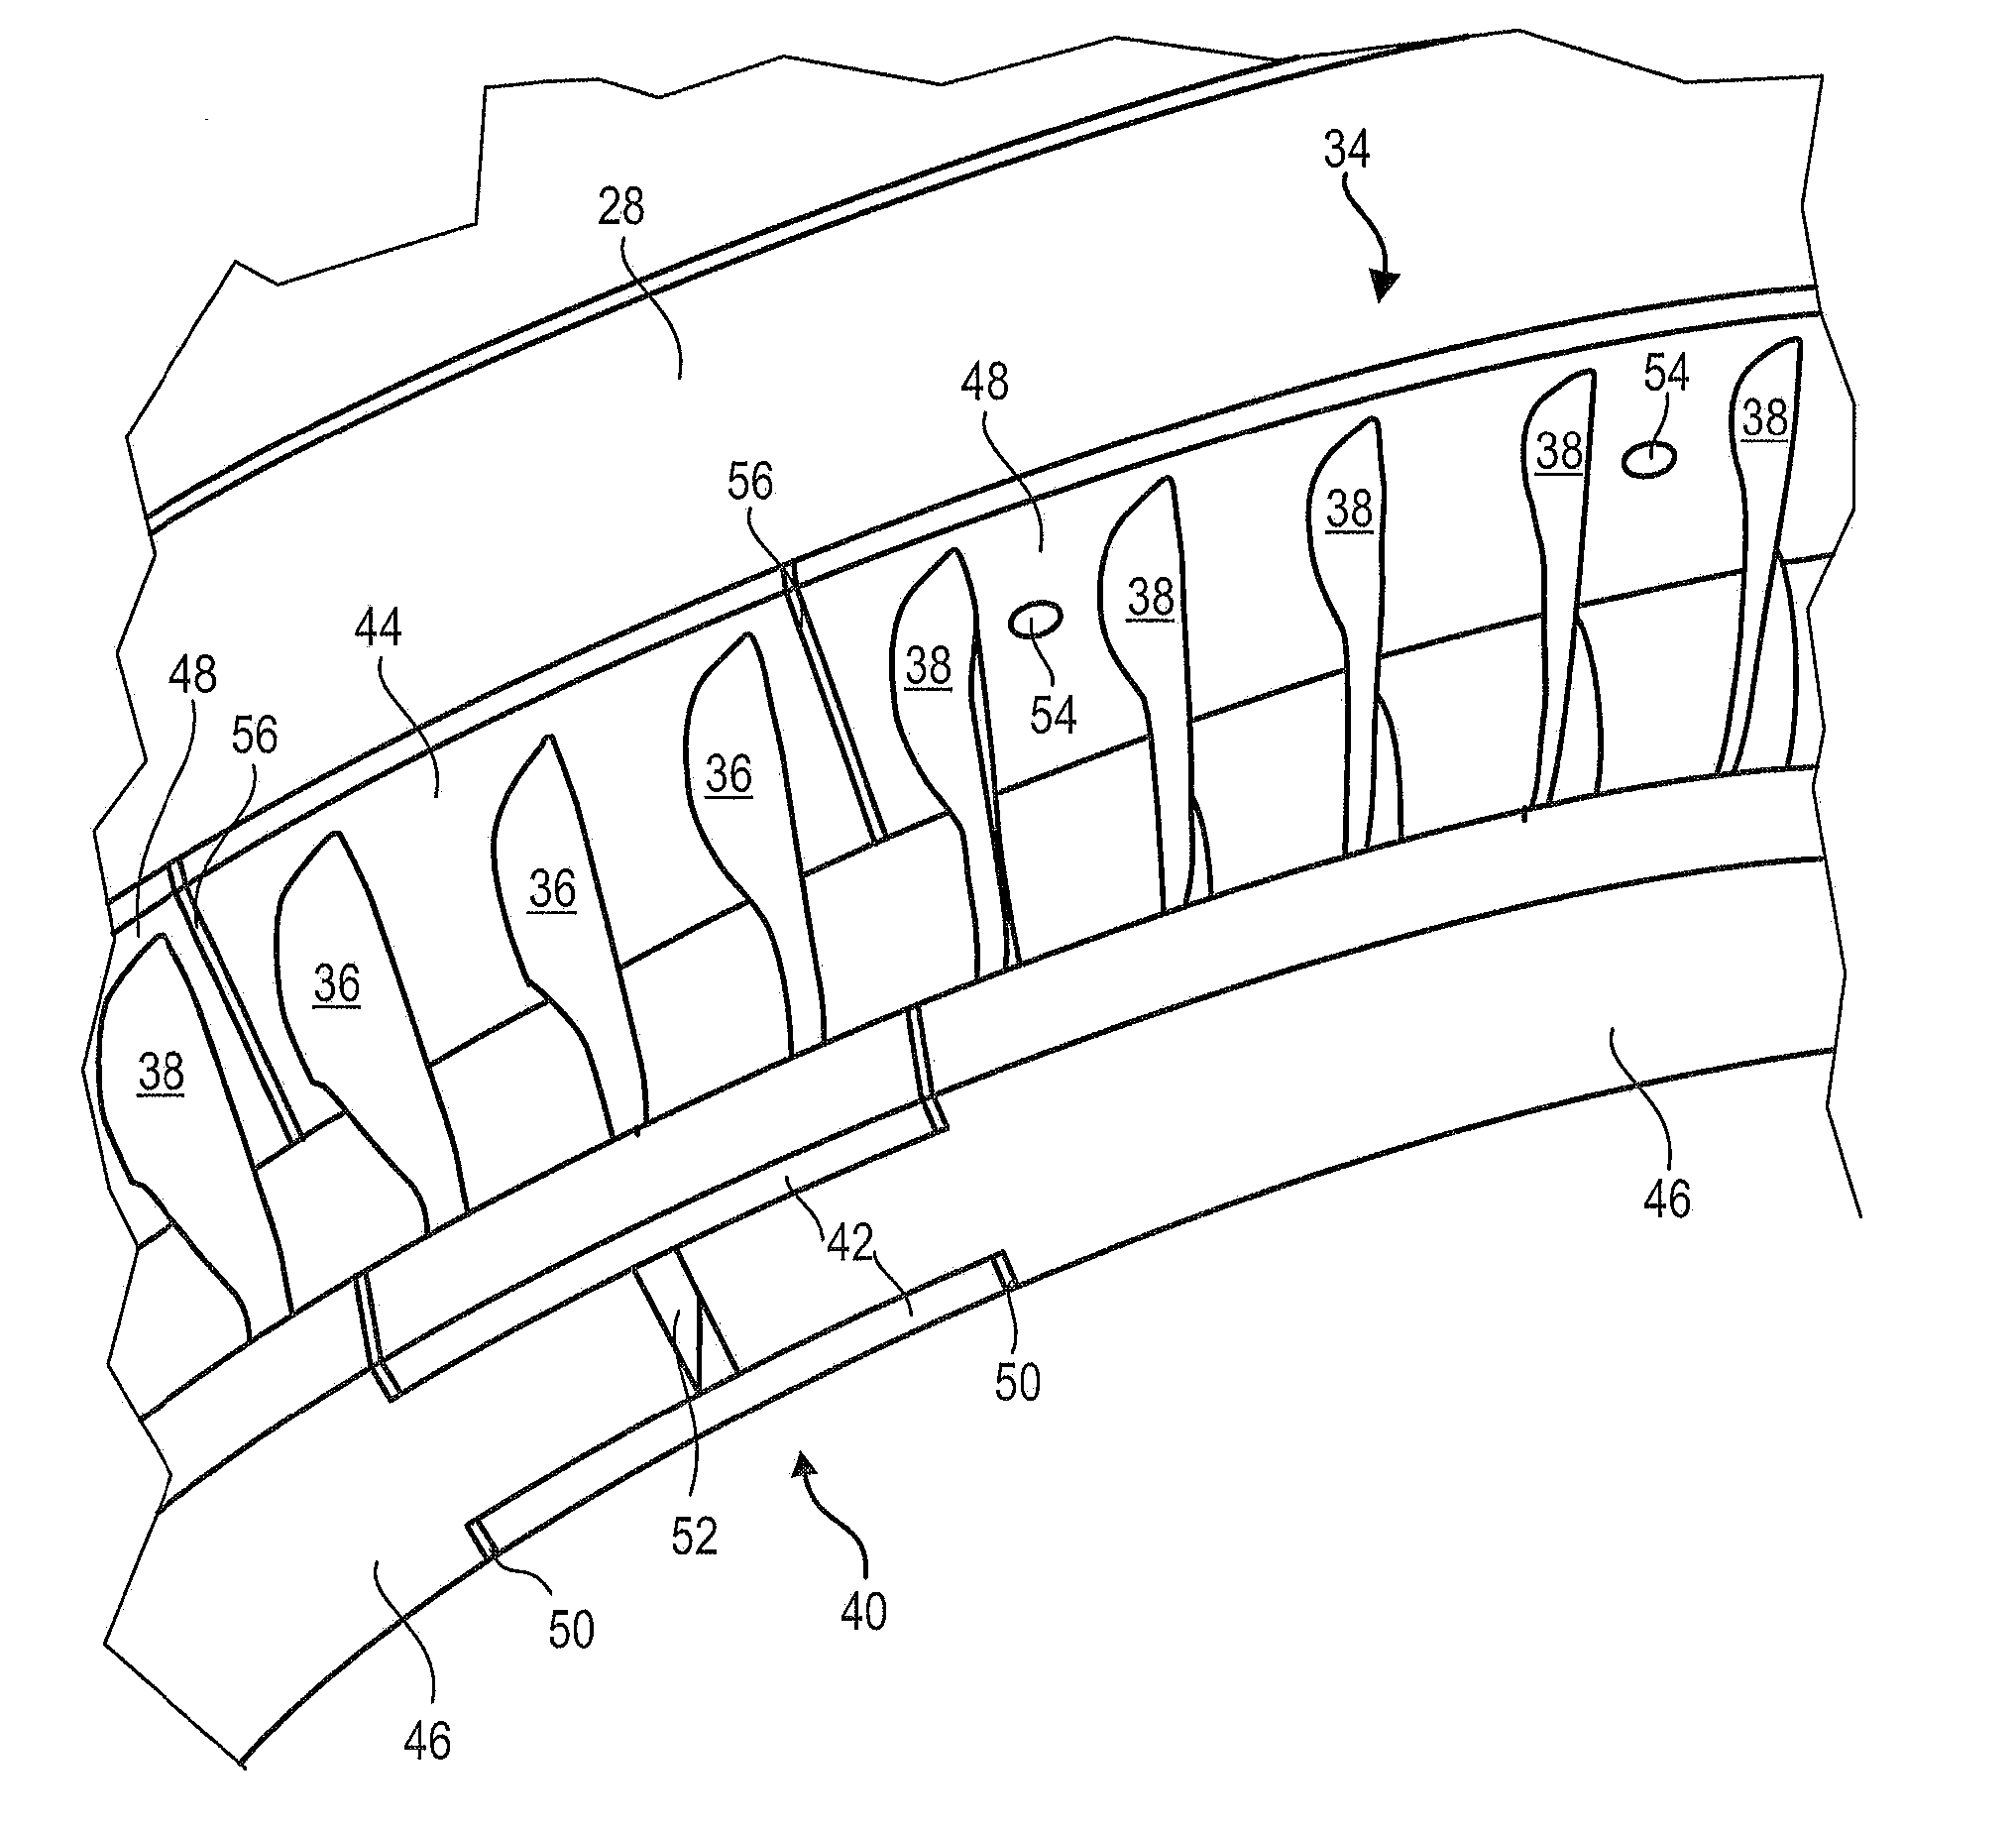 Mixed Stator for an Axial Turbine Engine Compressor